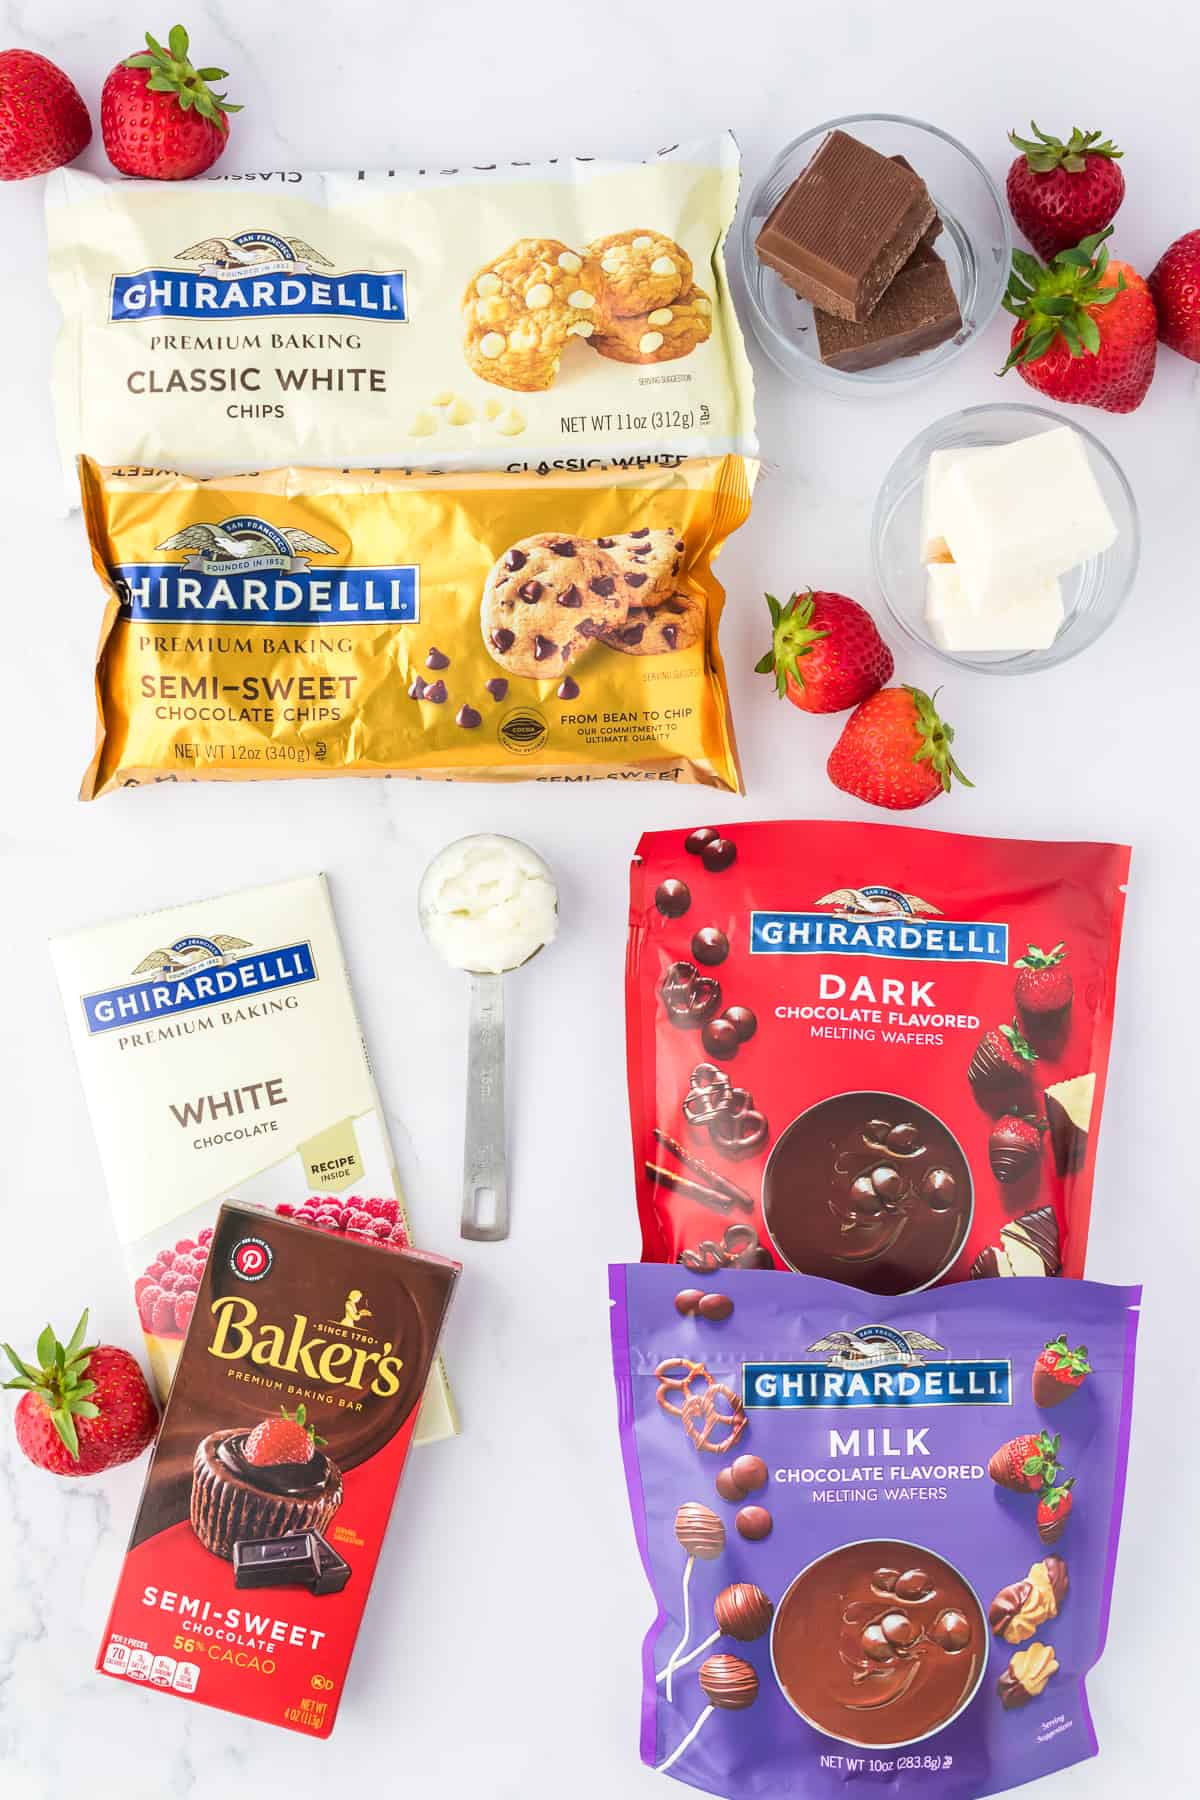 Ingredients for chocolate covered strawberries including fresh strawberries, a bag of ghiradelli classic white chips, ghiradelli semi sweet chocolate chips, white chocolate bar, semi-sweet chocolate, dark chocolate melting wafers and milk chocolate melting wafers, and coconut oil